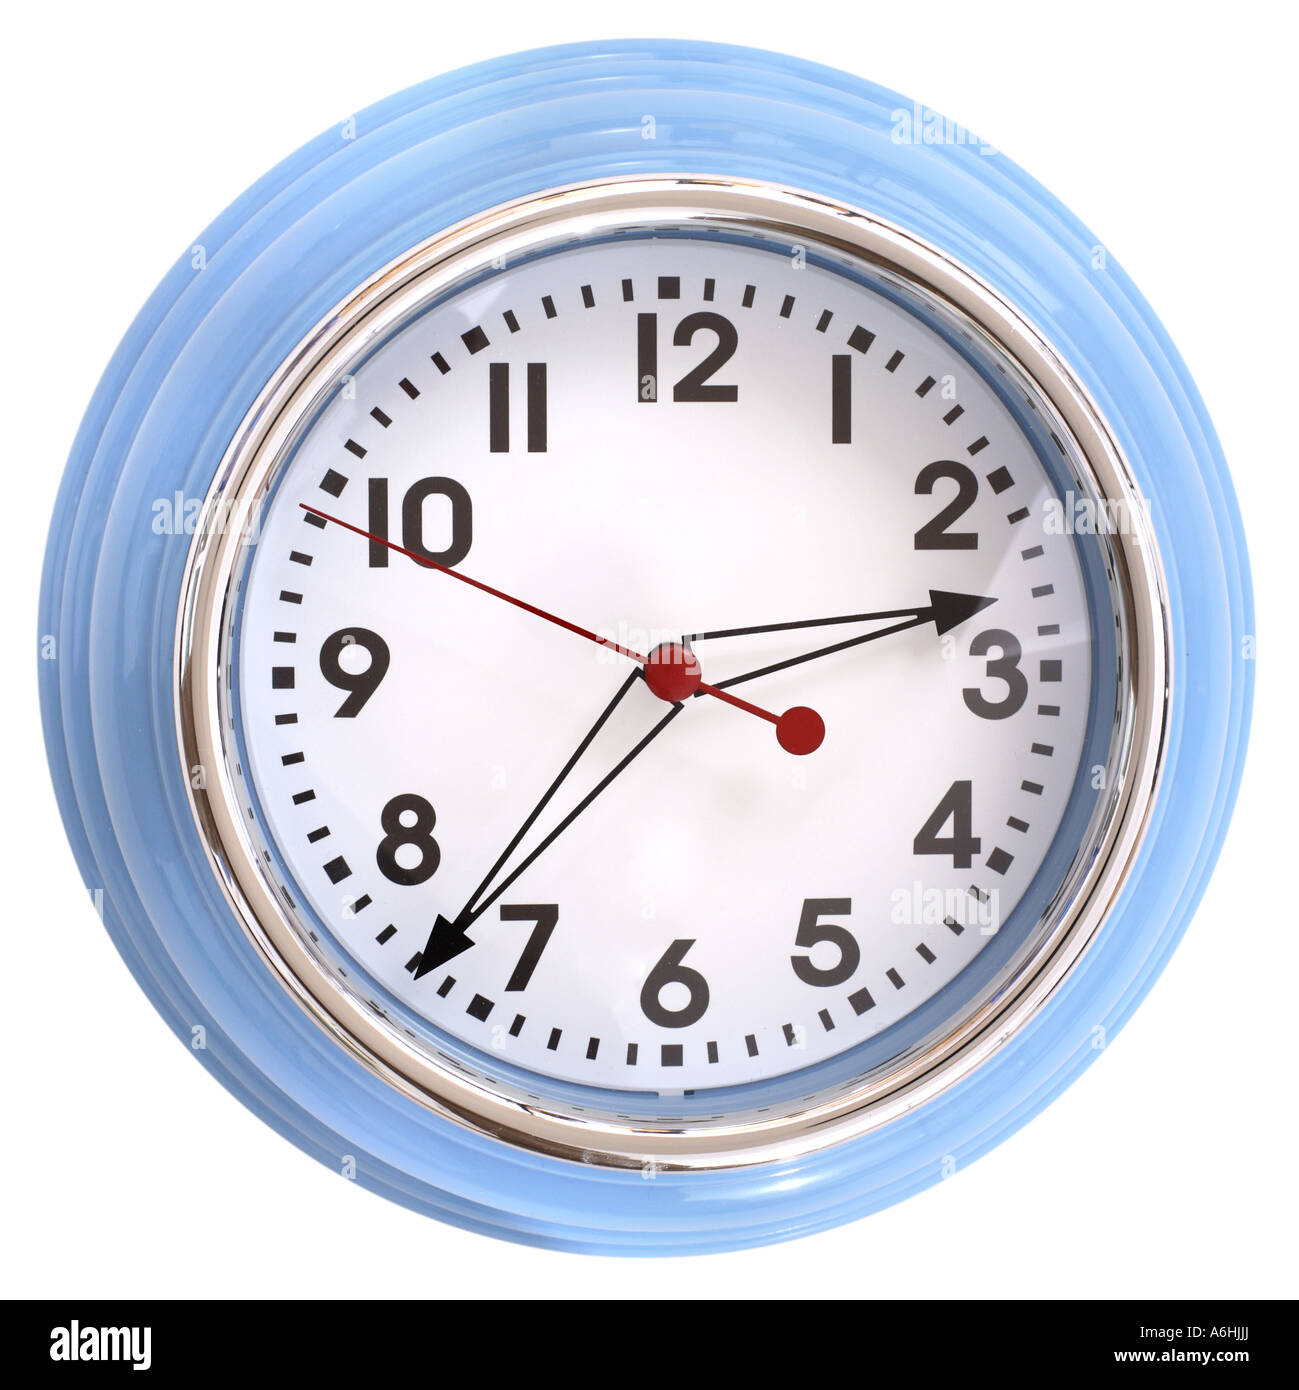 Retro Clock cut out on white background Stock Photo